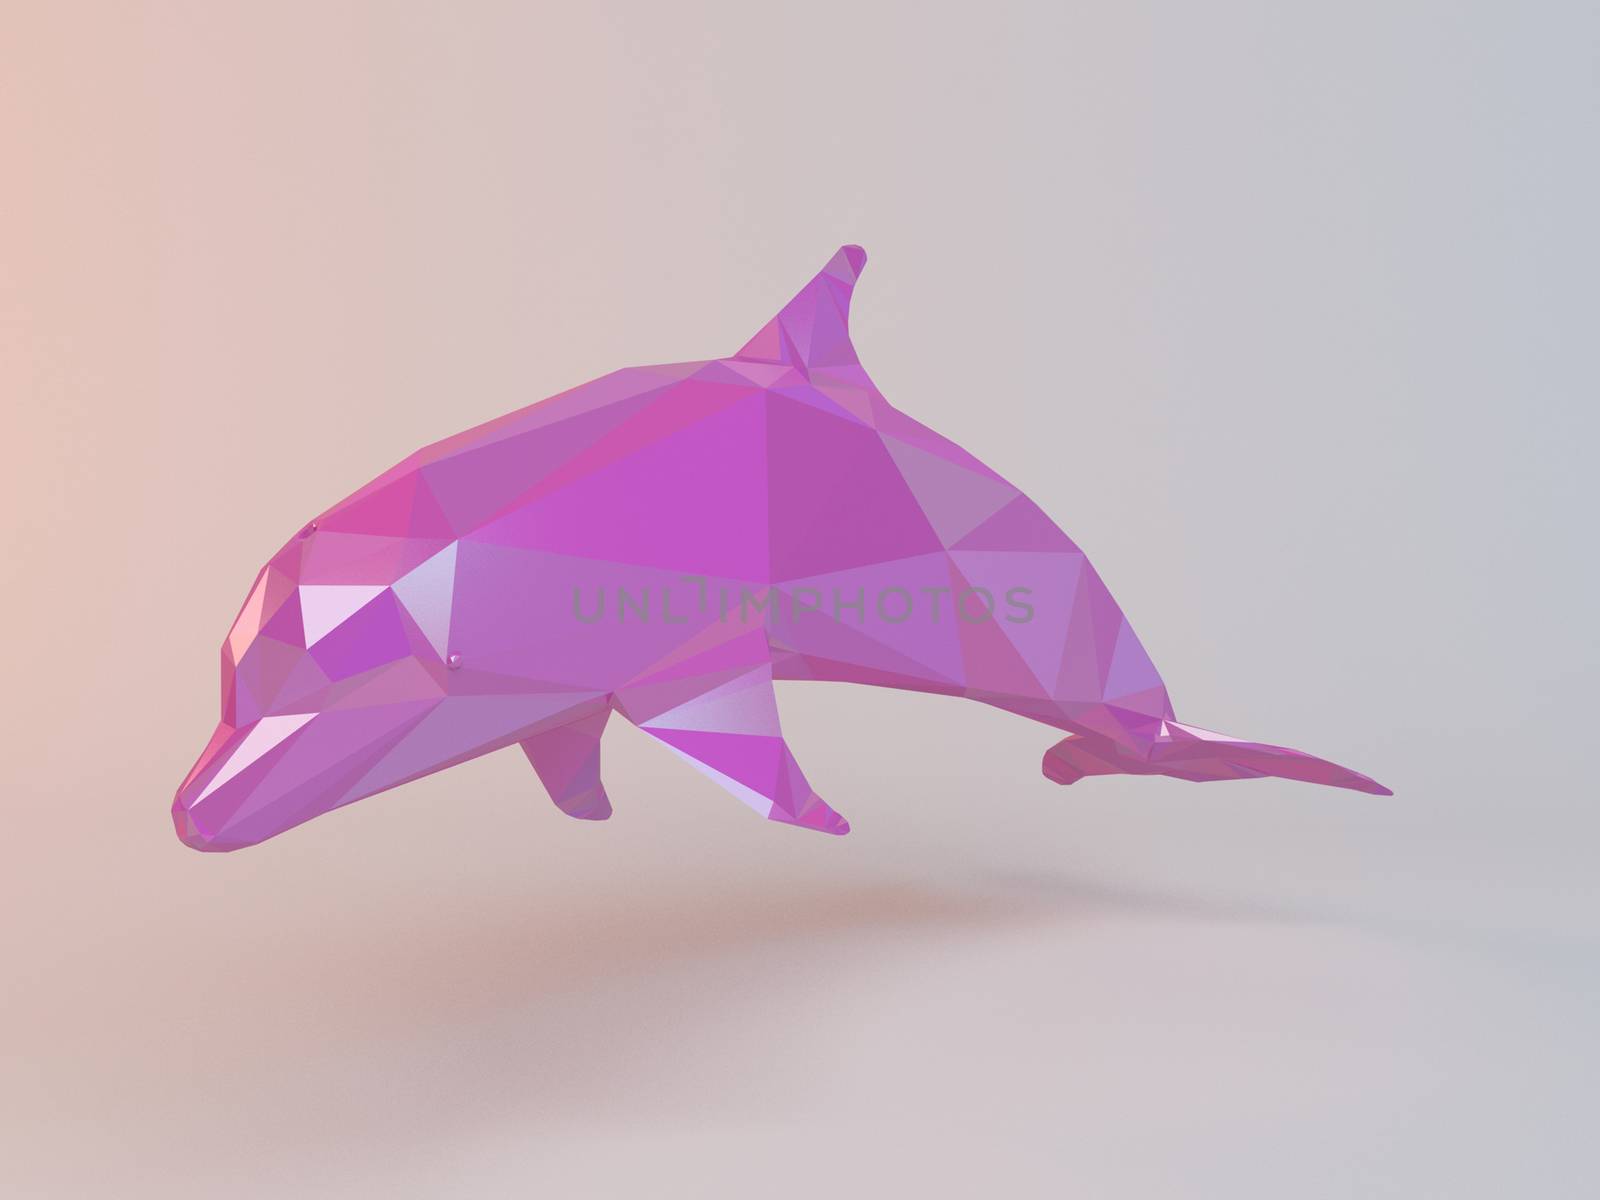 3D pink low poly (dolphin) inside a white stage with high render quality to be used as a logo, medal, symbol, shape, emblem, icon, children story, or any other use.